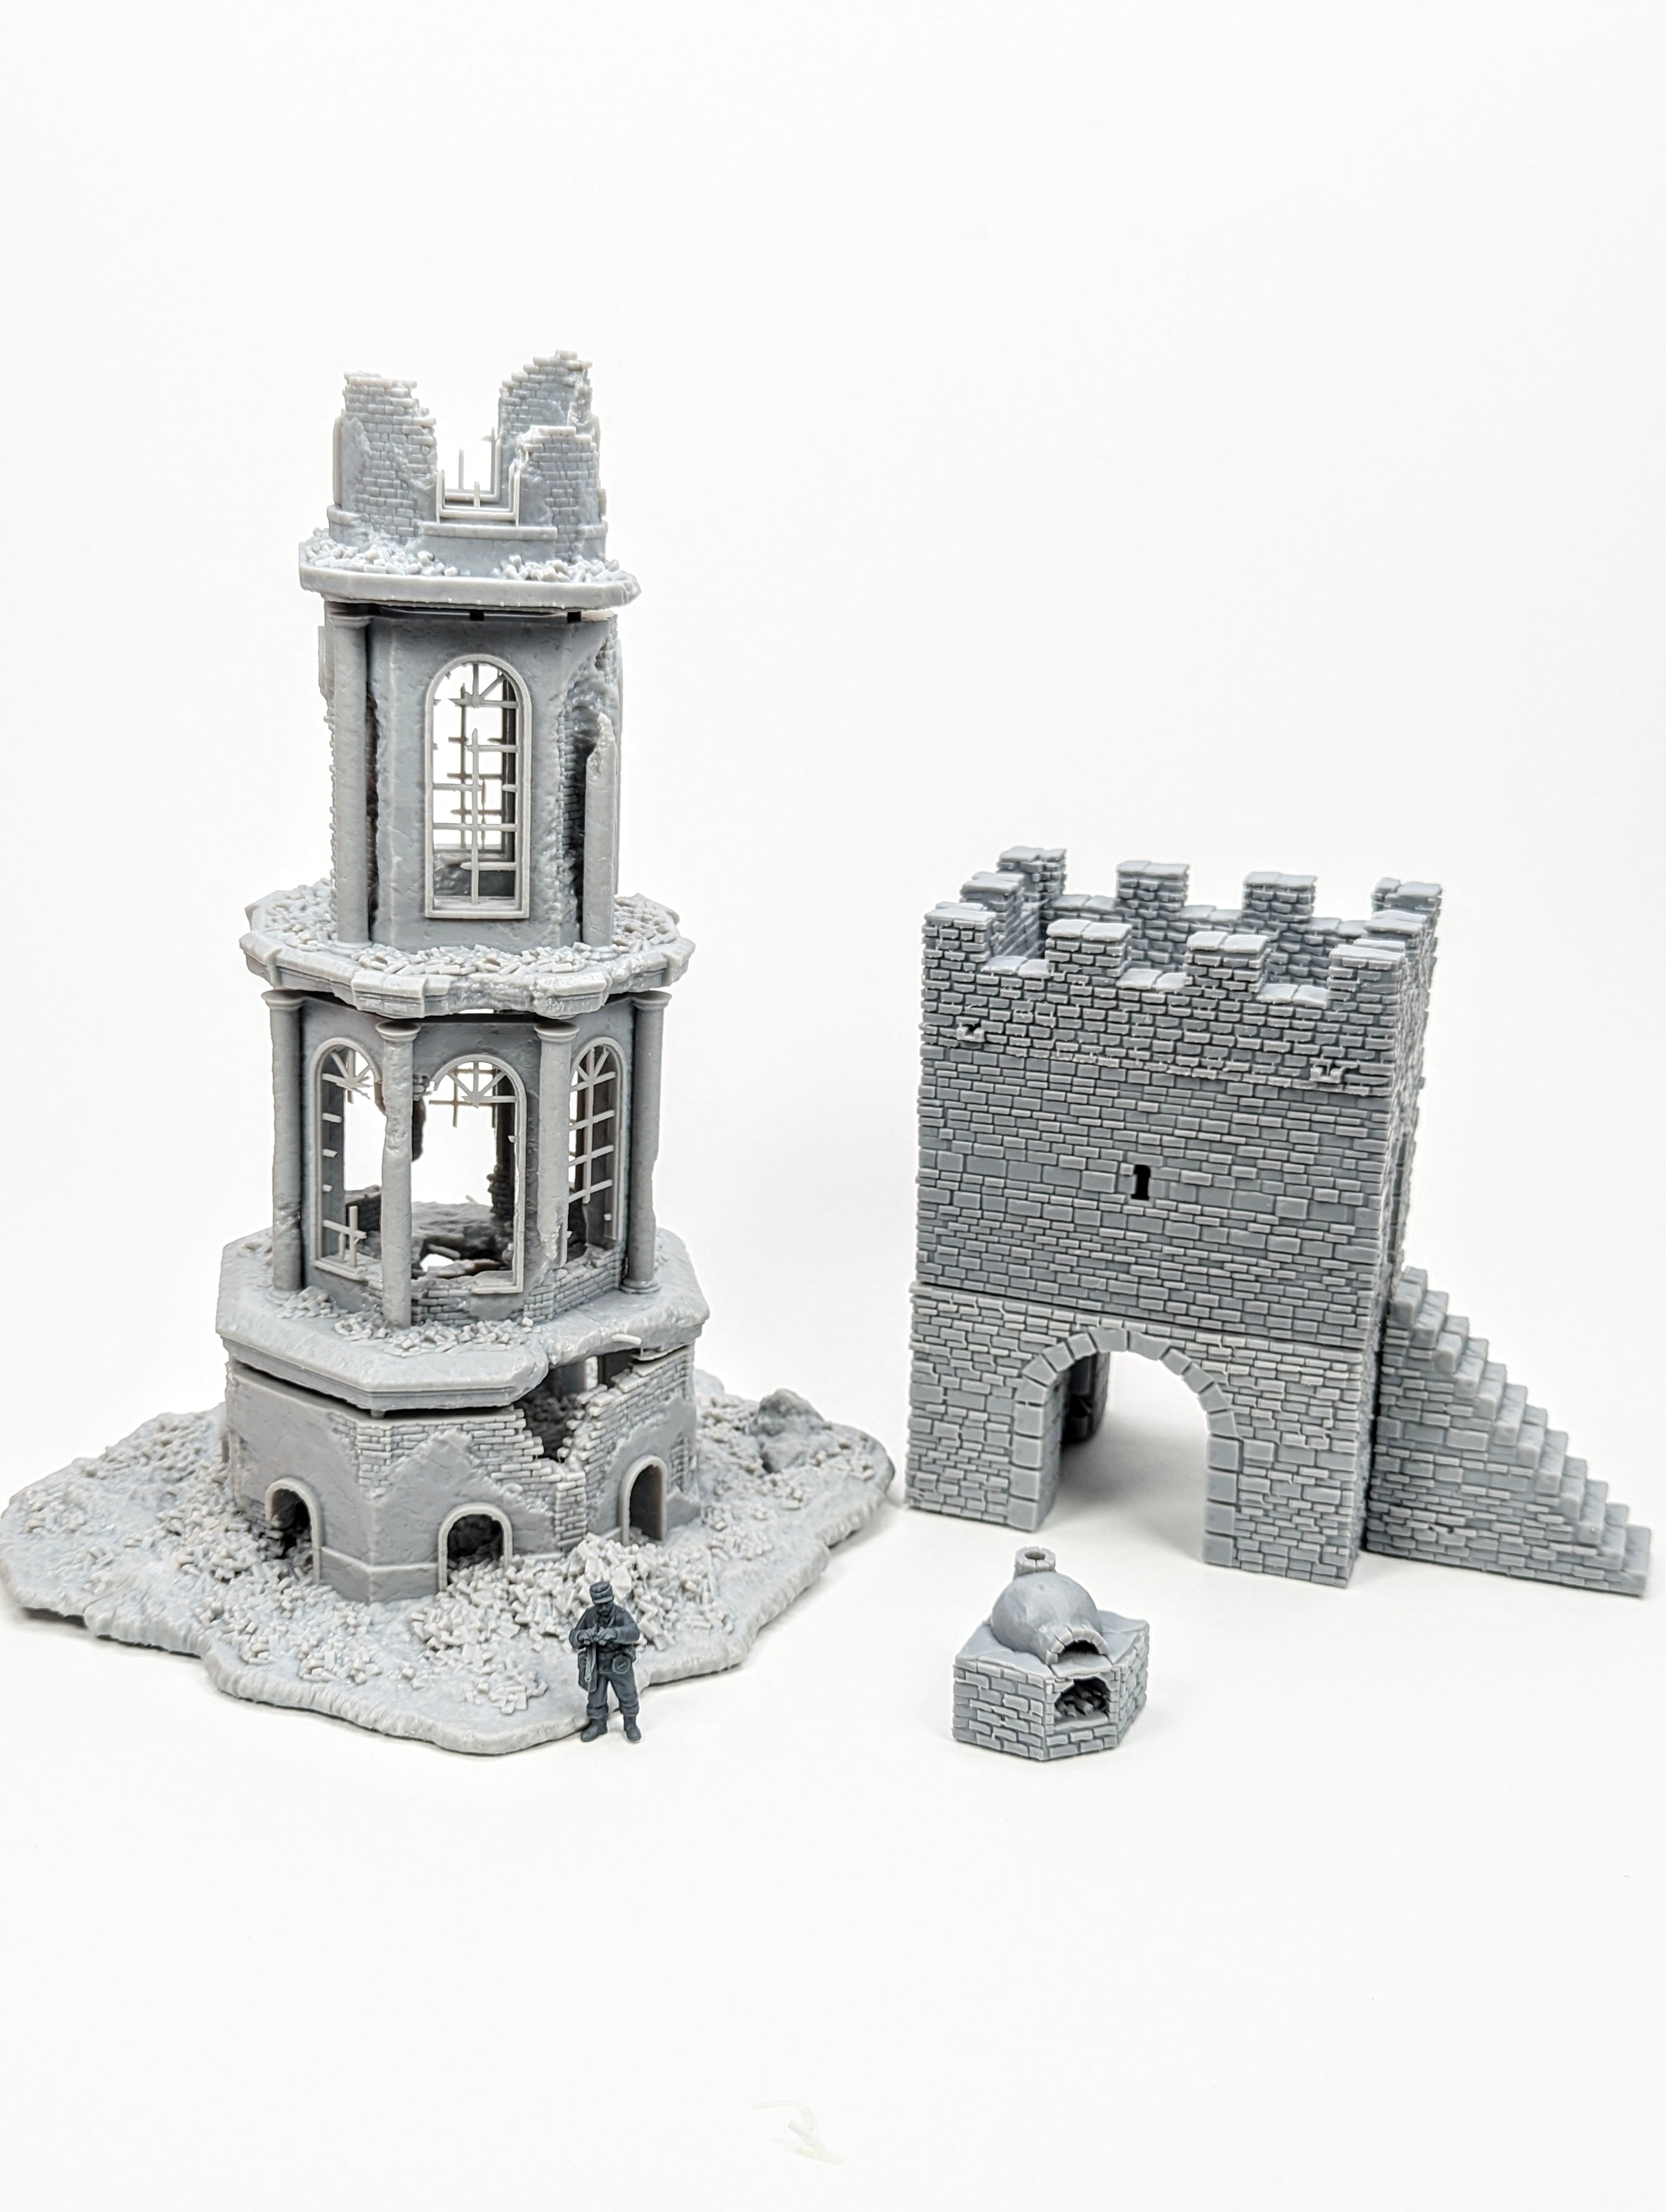 highly detailed architectural model resin printed